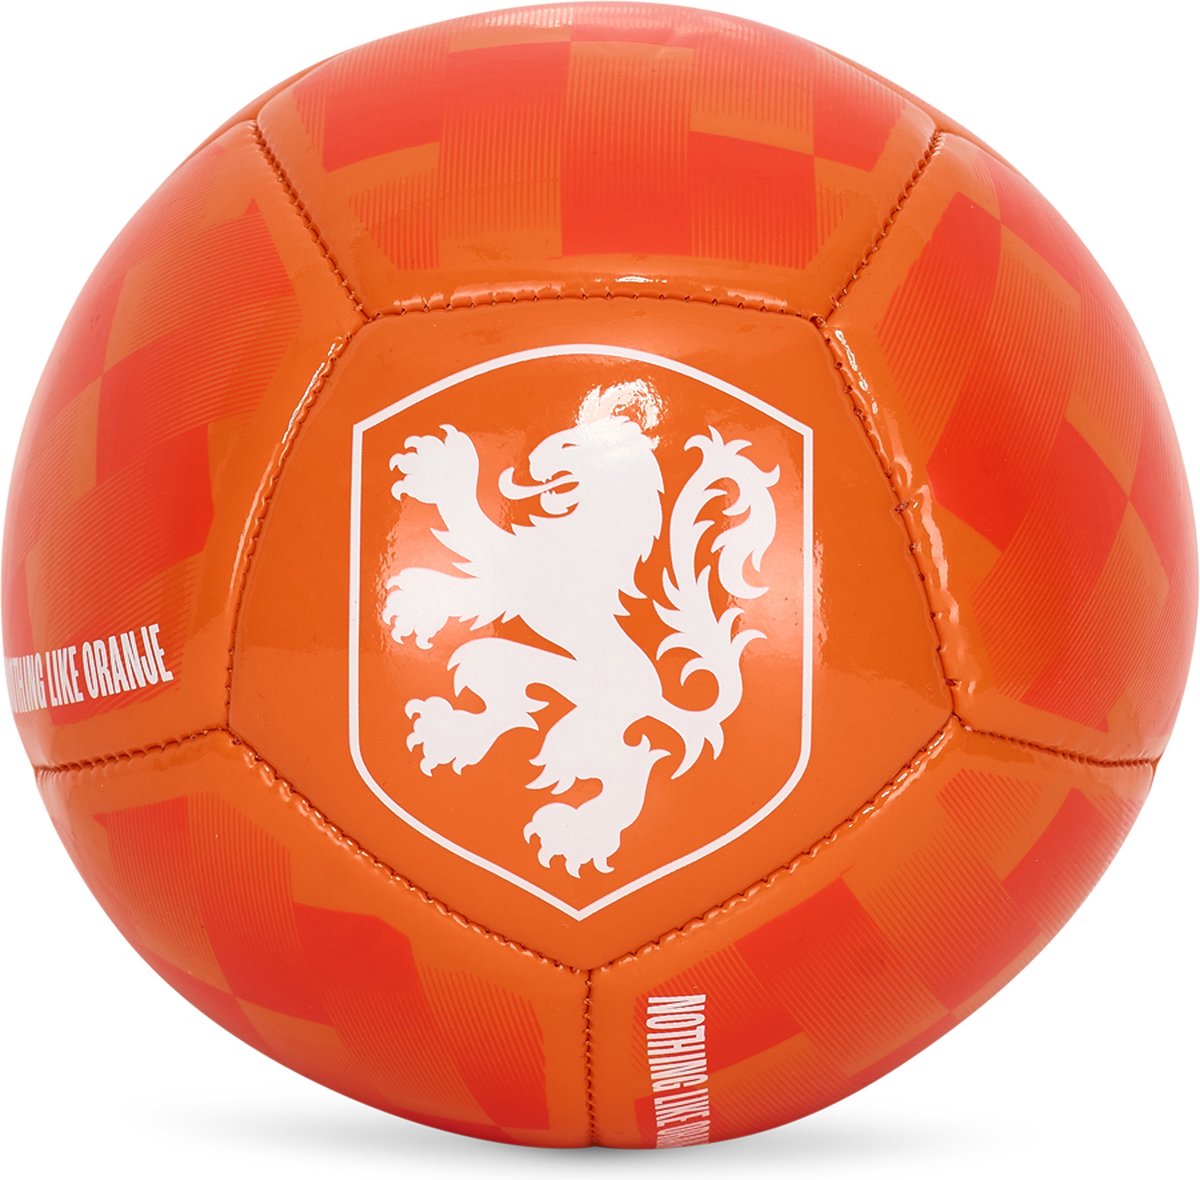 KNVB mini voetbal - one size - maat one size